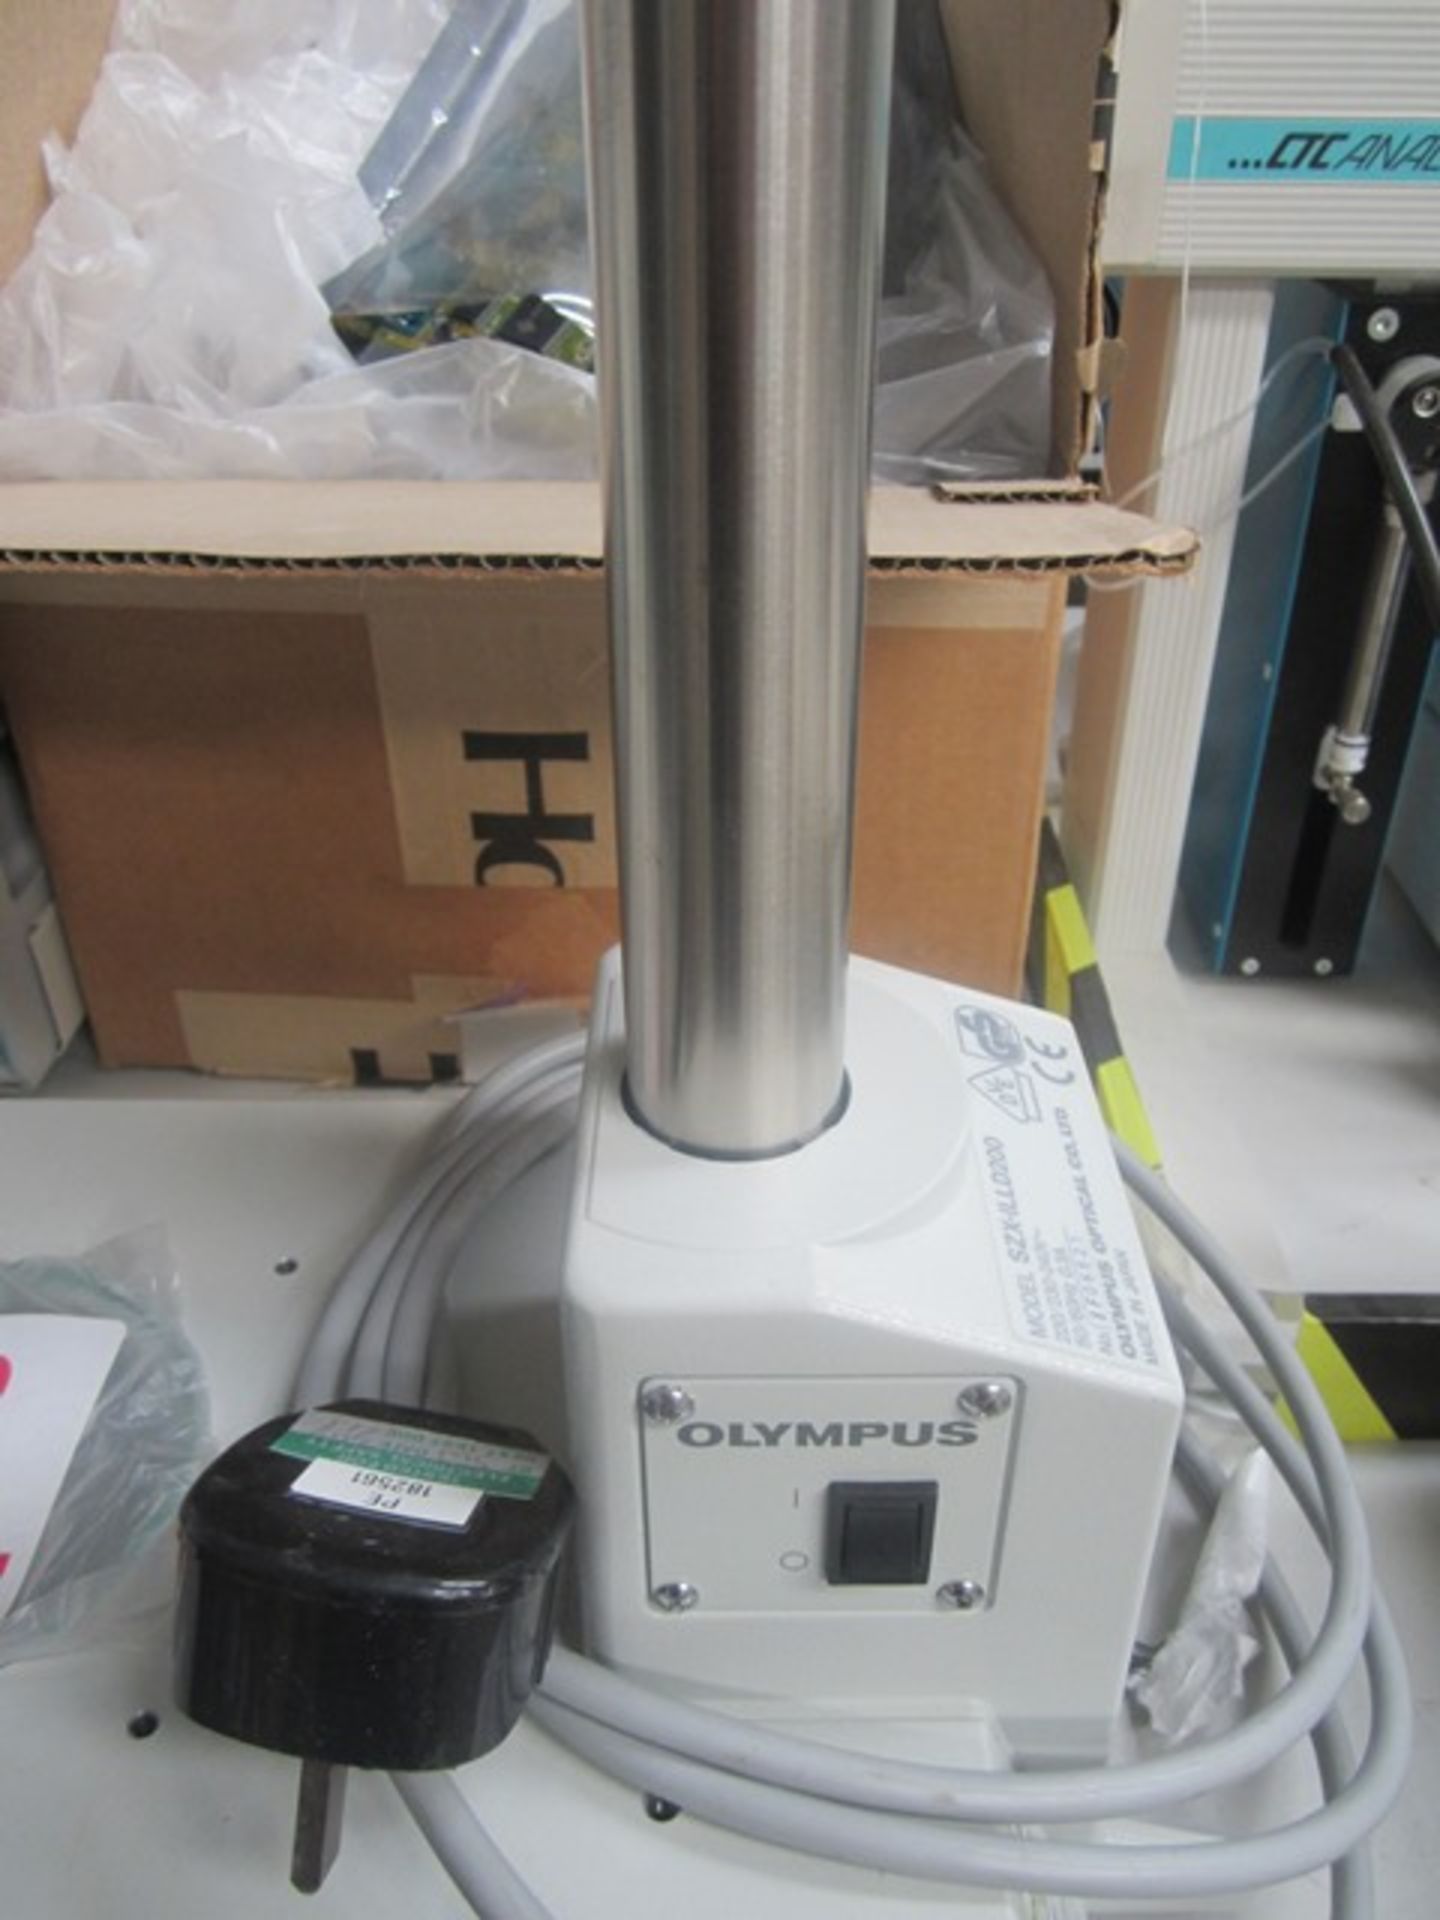 Olympus microscope stand, model SZX-ILLD200 - Image 3 of 3